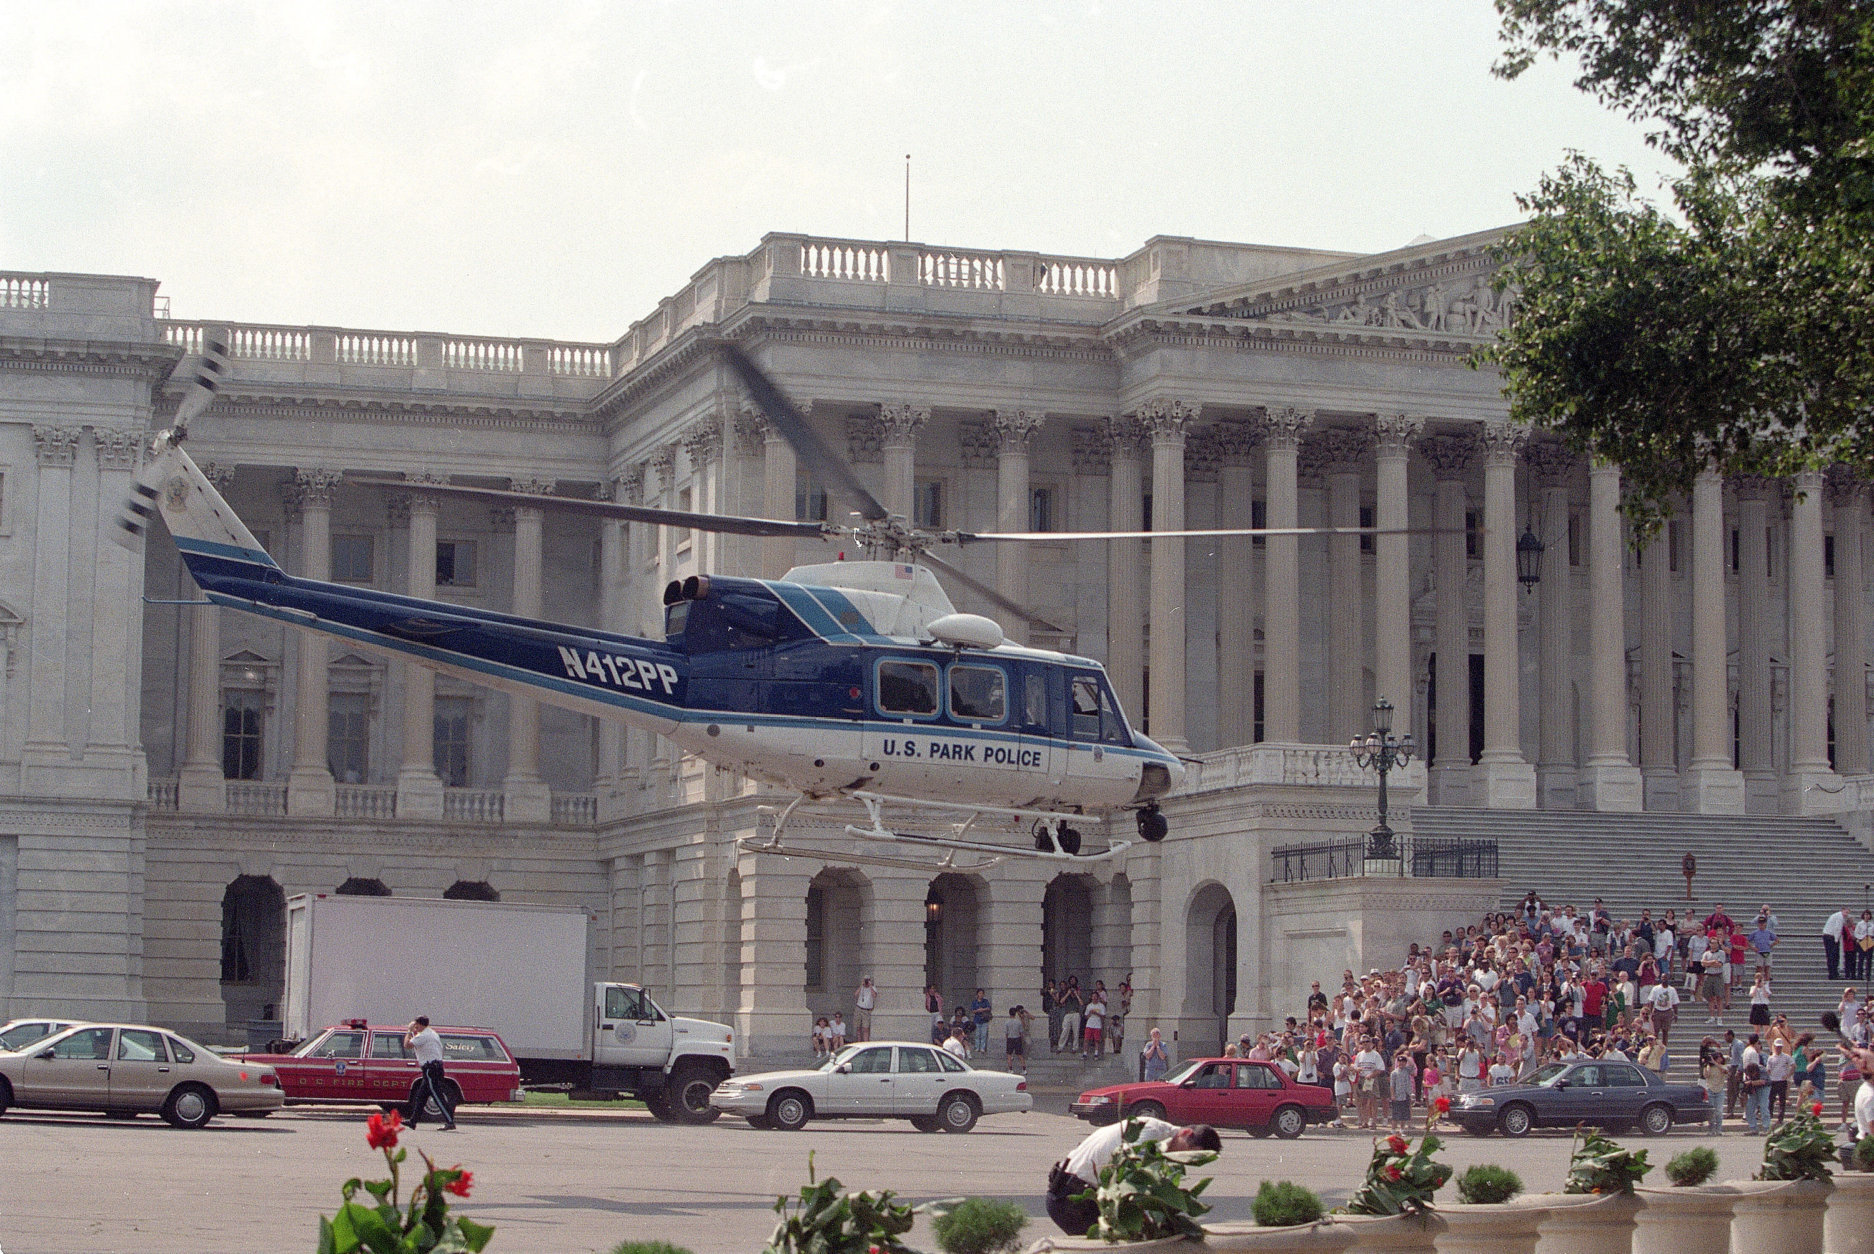 A U.S. Park Police helicopter lifts off from the grounds of the Capitol in Washington, D.C. on Friday, July 24, 1998.  Two policemen, a female tourist and a suspected gunman were wounded in an exchange of gunfire after a gunman opened fire inside the Capitol building.  (AP Photo/Khue Bui)